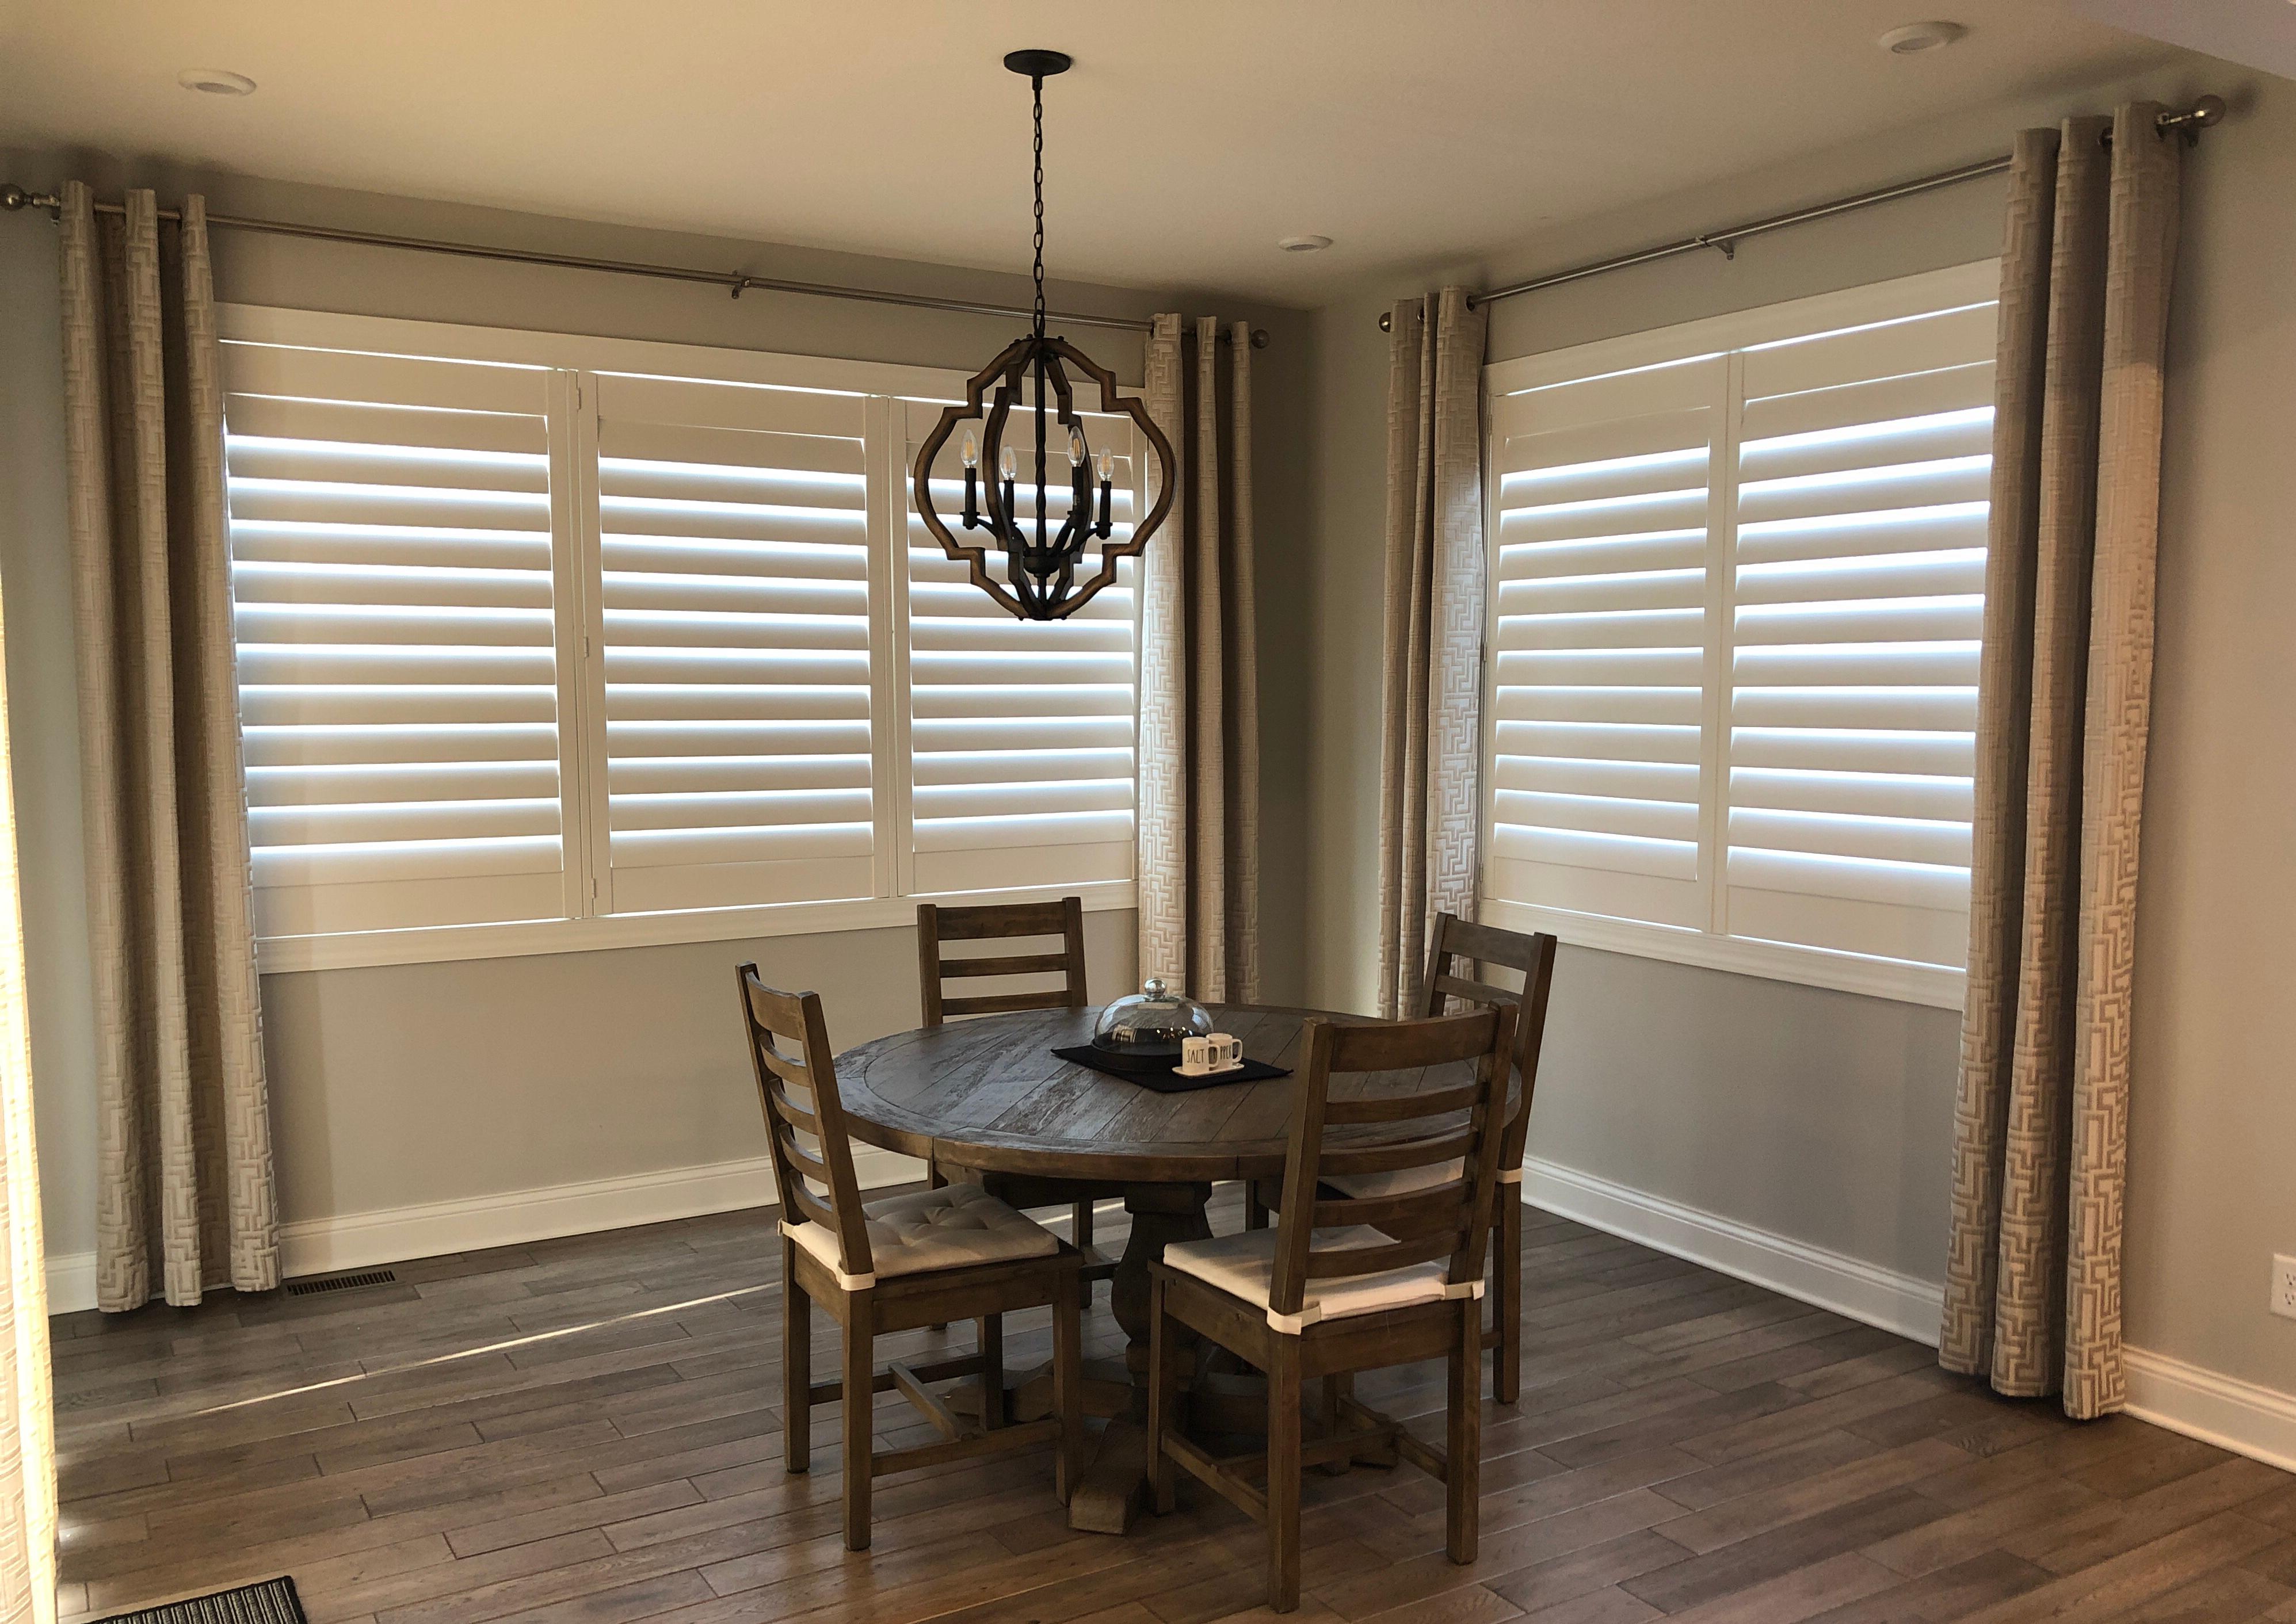 Combining stationary panels and shutters adds classic appeal to any space.